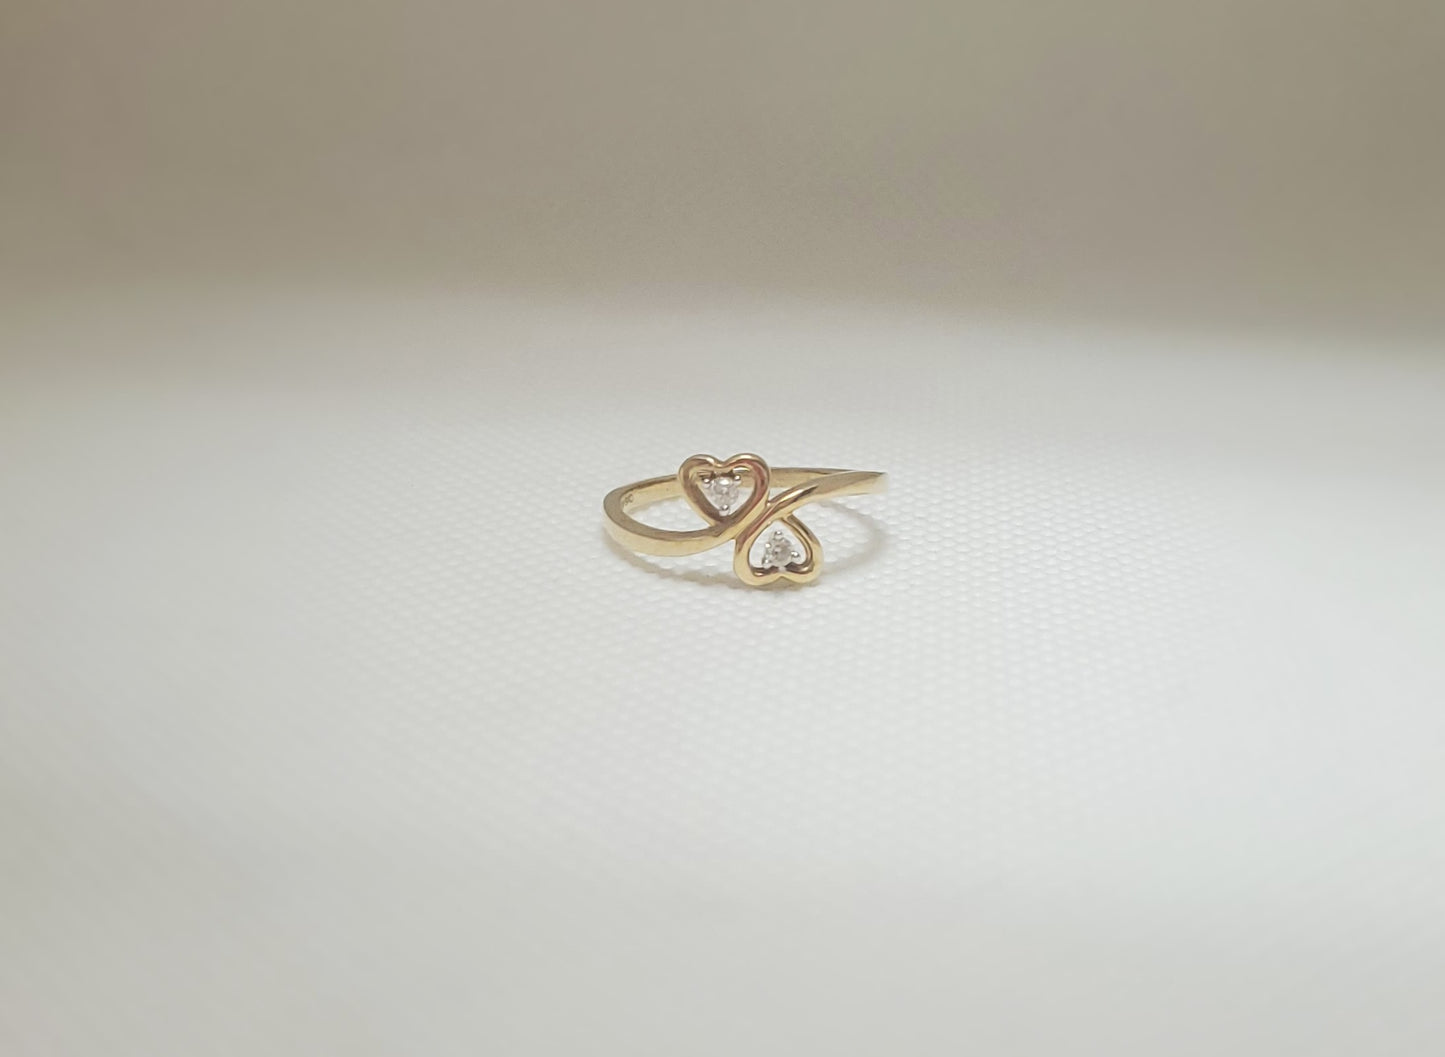 10K Yellow Gold Double Heart Ring